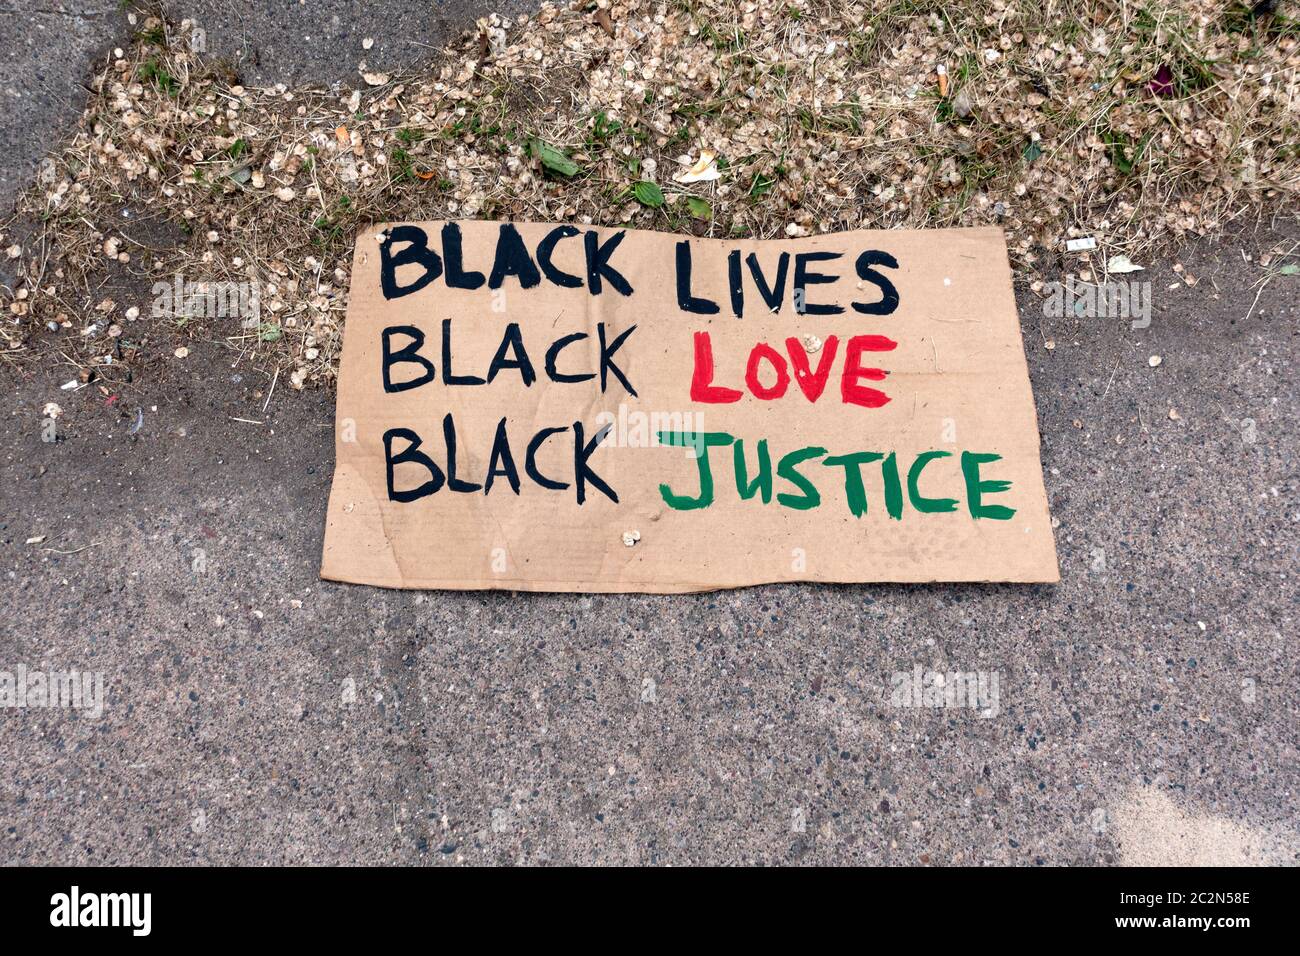 Street poster saying 'Black Lives' Black Love' 'Black Justice' at site of George Floyd death 38th and Chicago. Minneapolis Minnesota MN USA Stock Photo